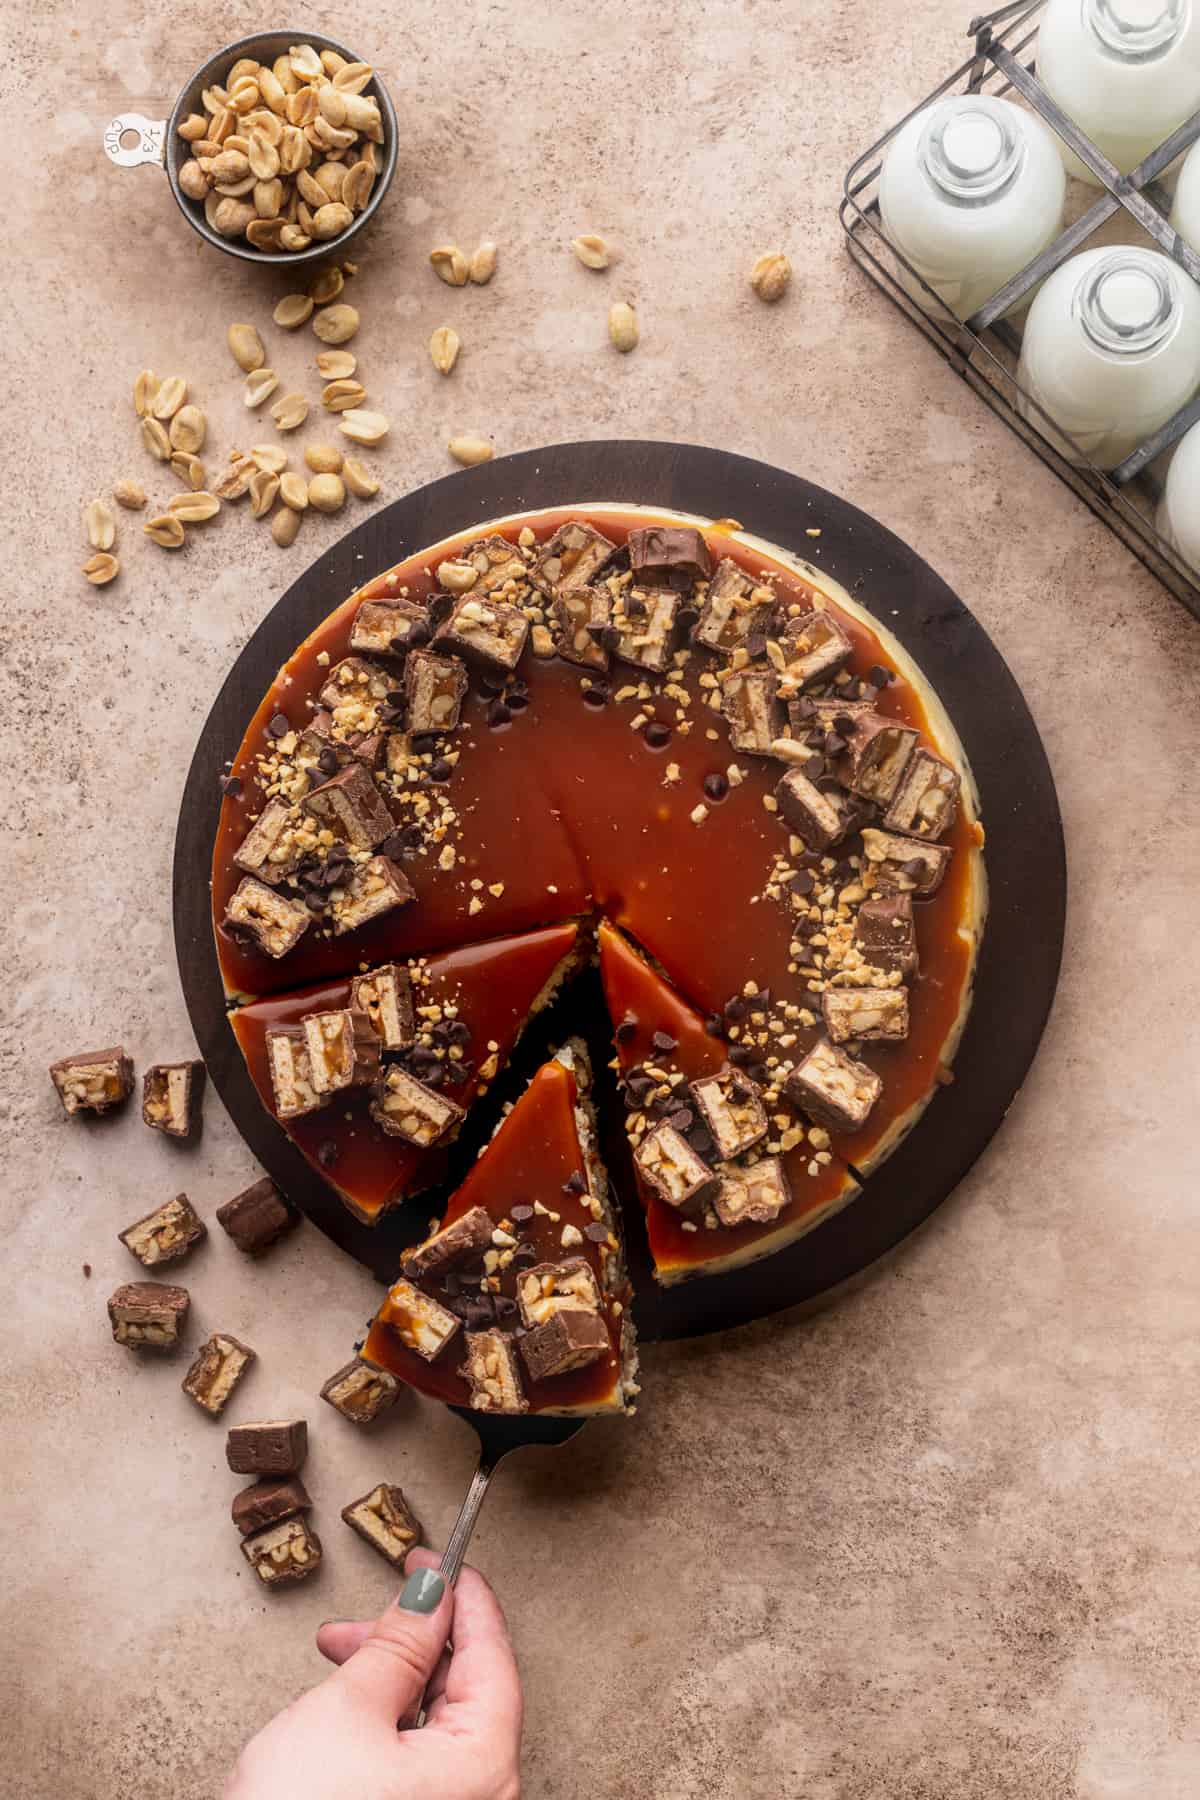 Snickers cheesecake cut into thirds pulling one pieces out.